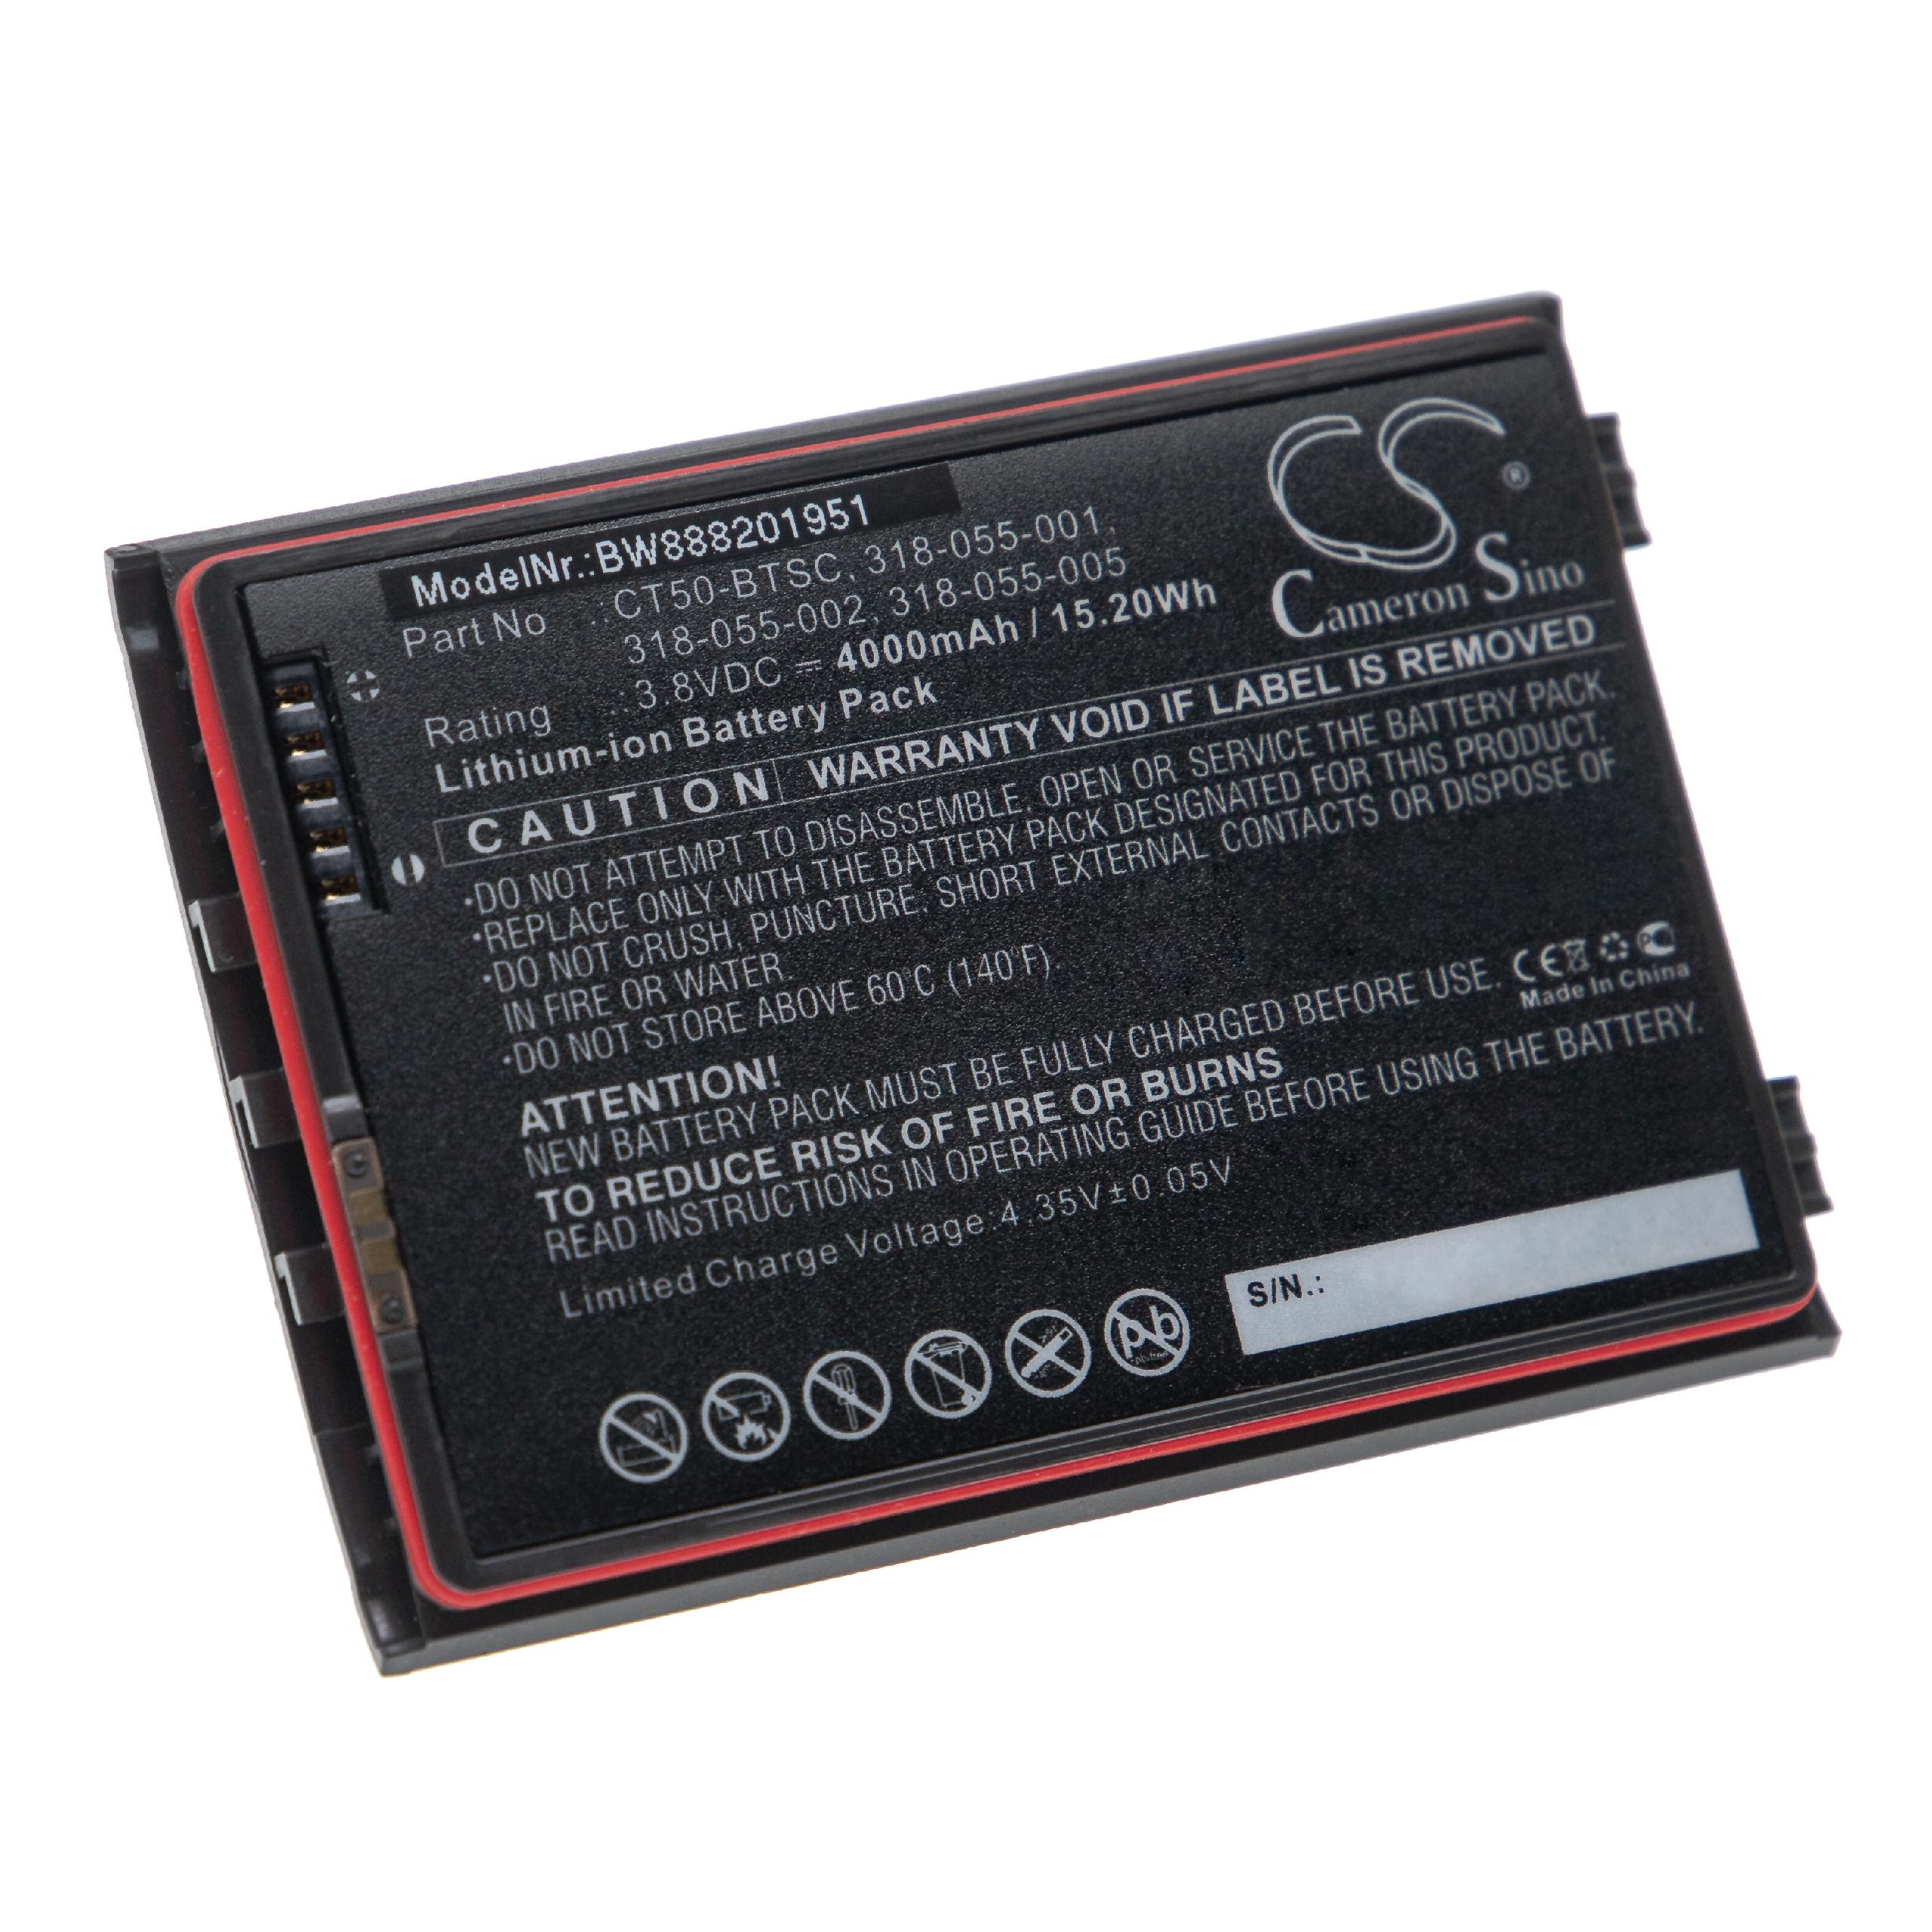 Handheld Computer Battery Replacement for Dolphin 318-055-001, CT50-BTSC, 318-055-002 - 4000mAh, 3.8V